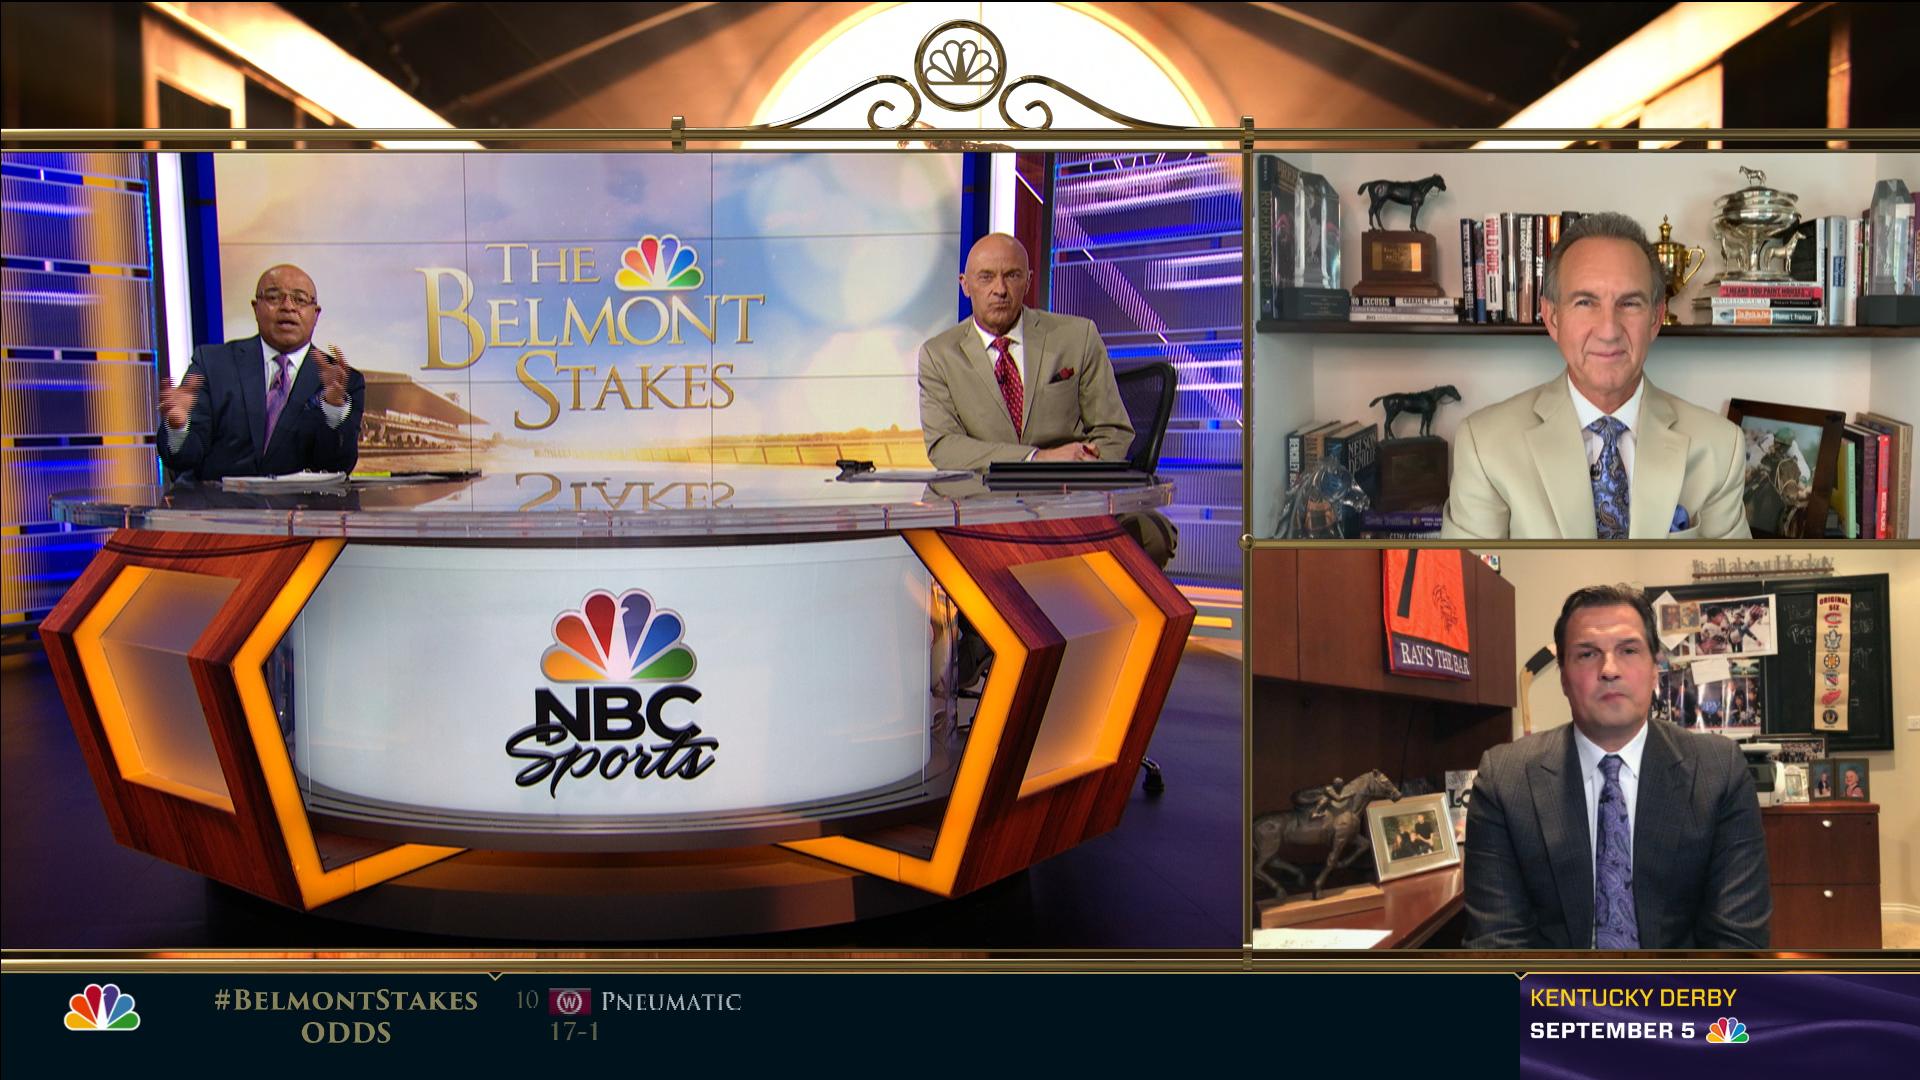 Without Crowds at Kentucky Derby, NBC Sports Looks To Deliver ‘Intimate